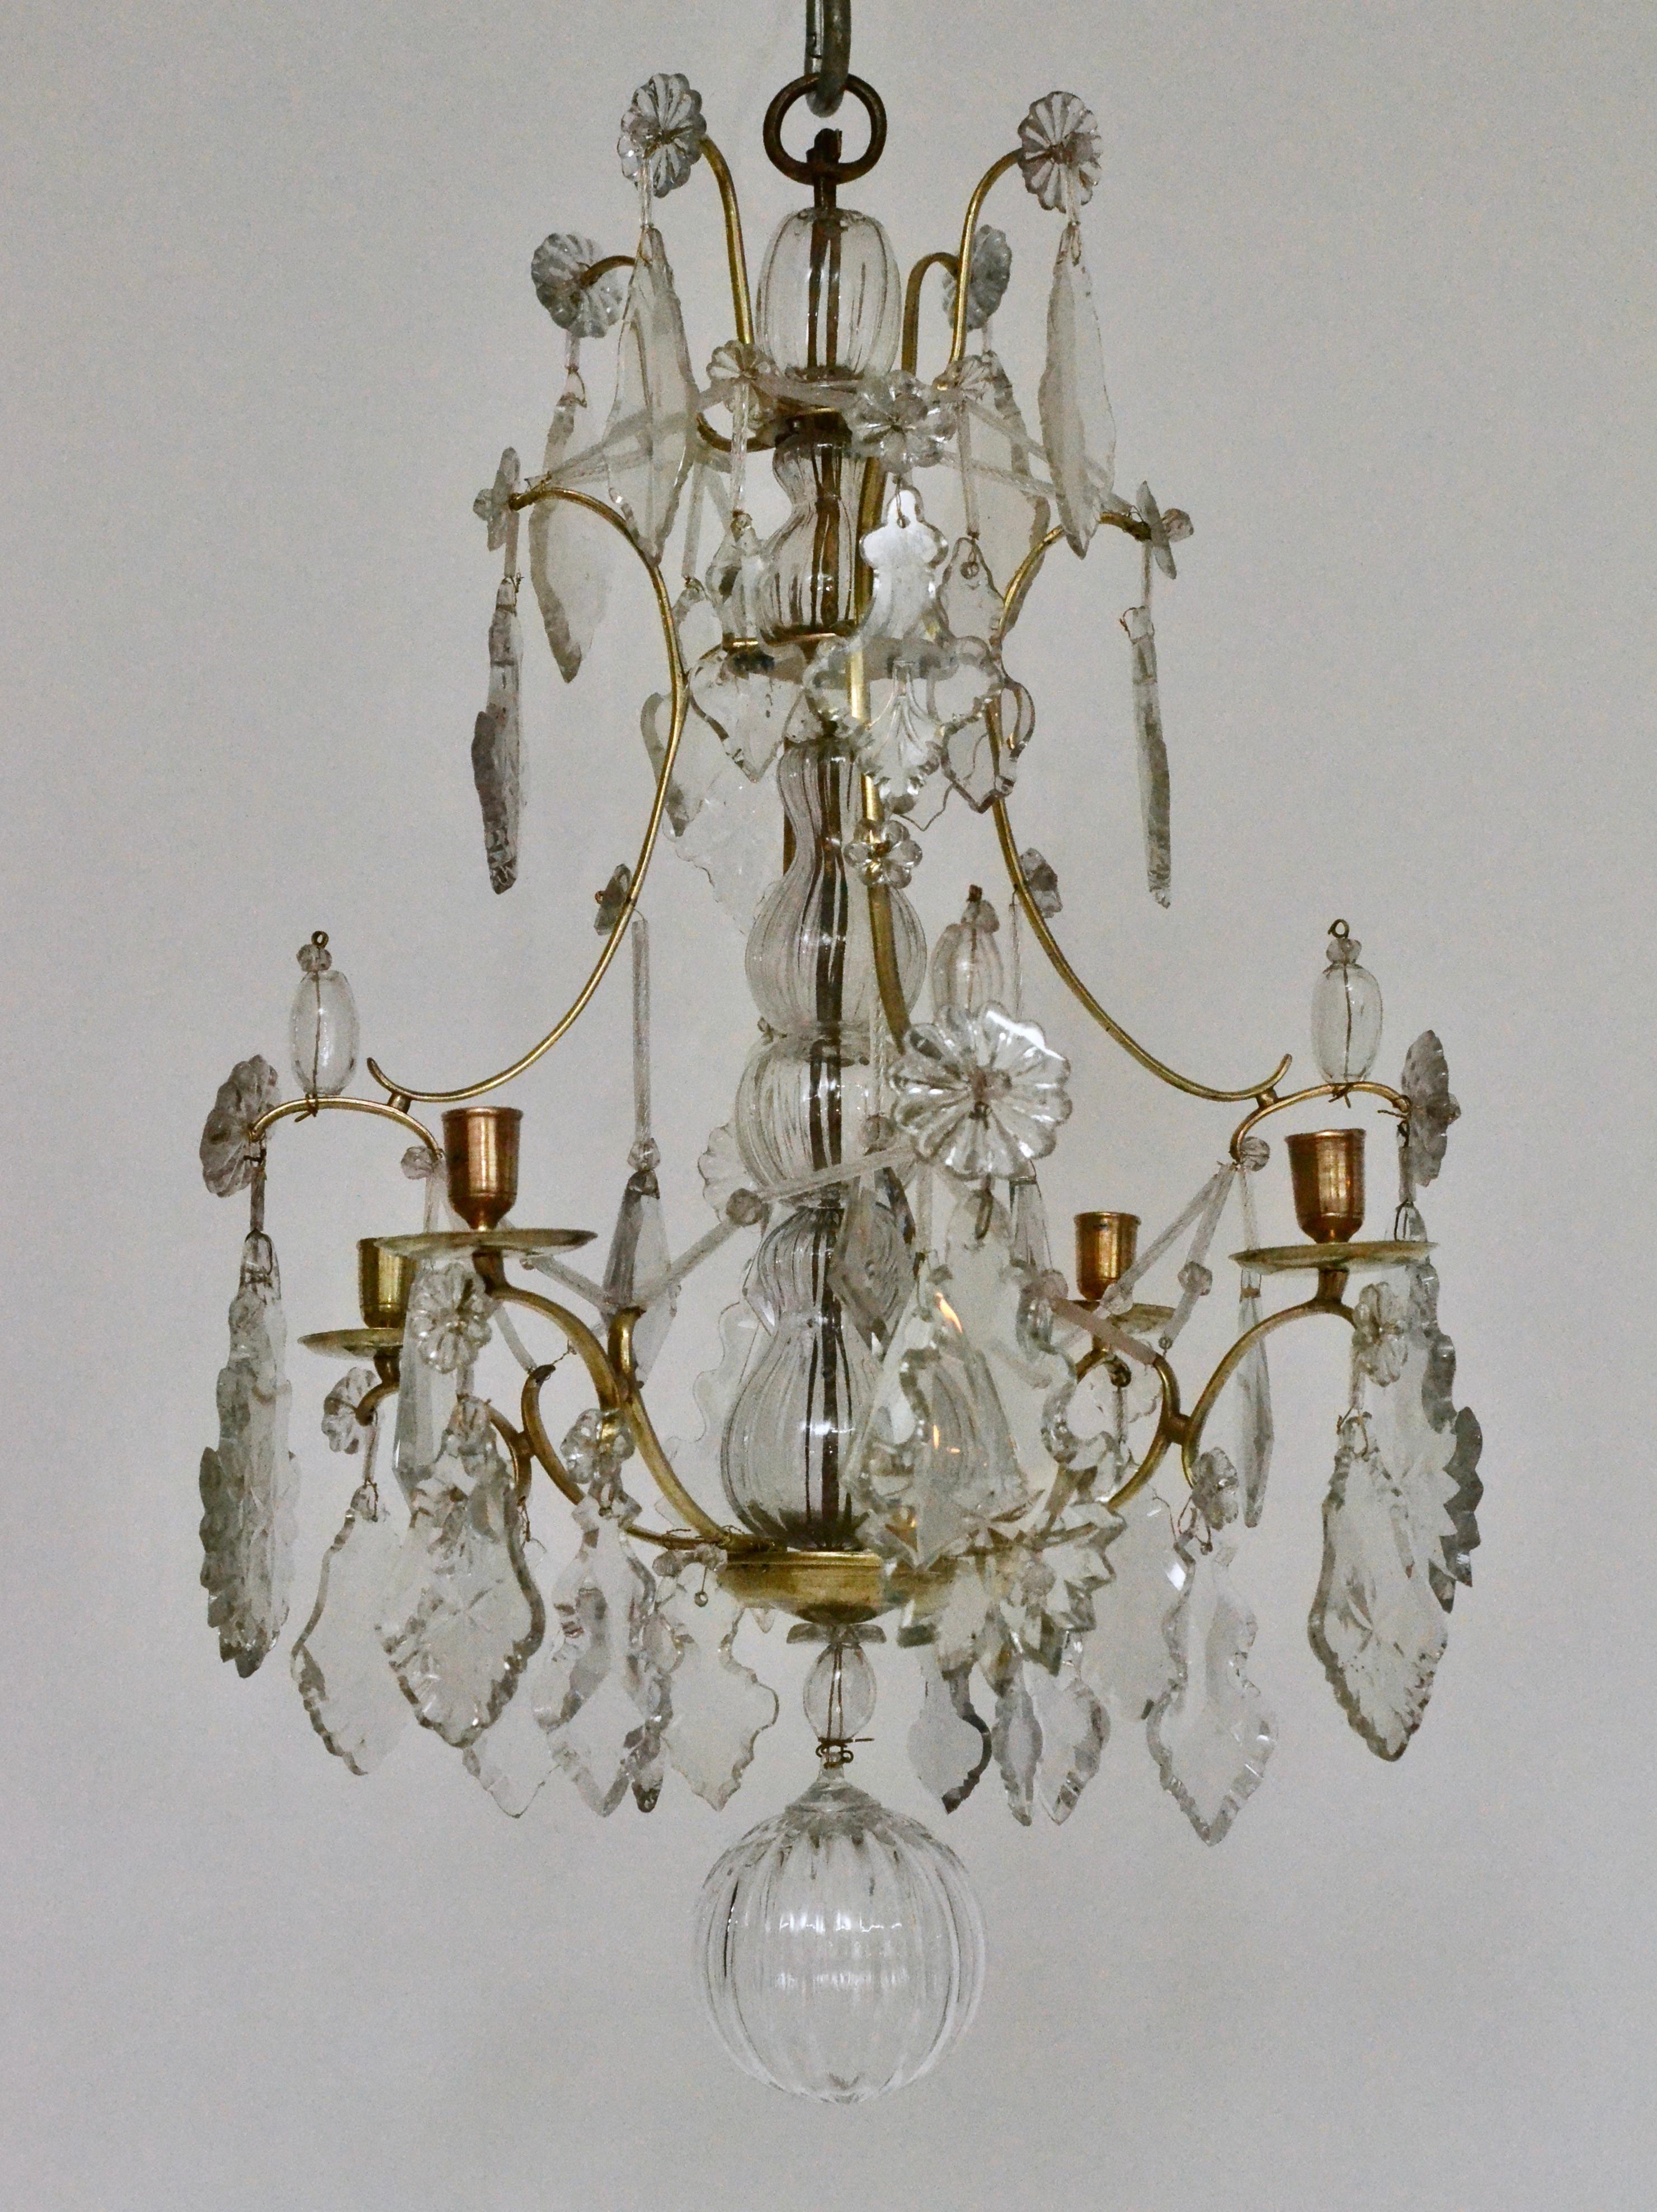 A small Swedish Louis XV polished brass and cut-glass four-light chandelier, 18th century.
The brass cage hung with cut-glass leaf-shaped pendants and other shapes. The center stem dressed with blown glass pieces ending below with a blown glass